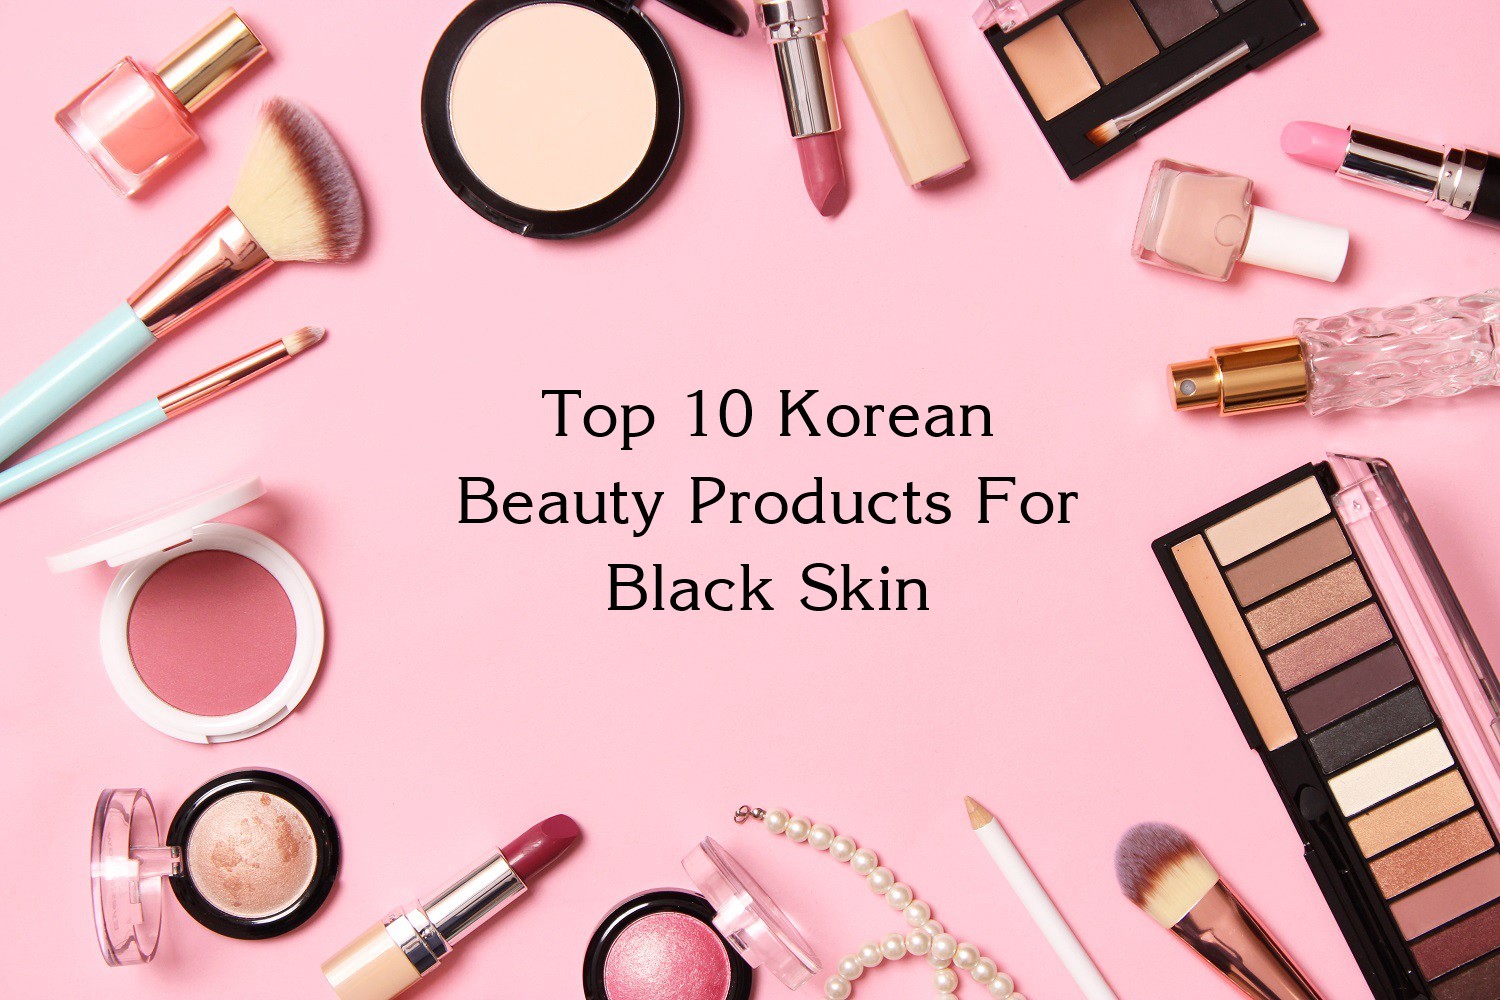 Top 10 Korean Beauty Products For Black Skin